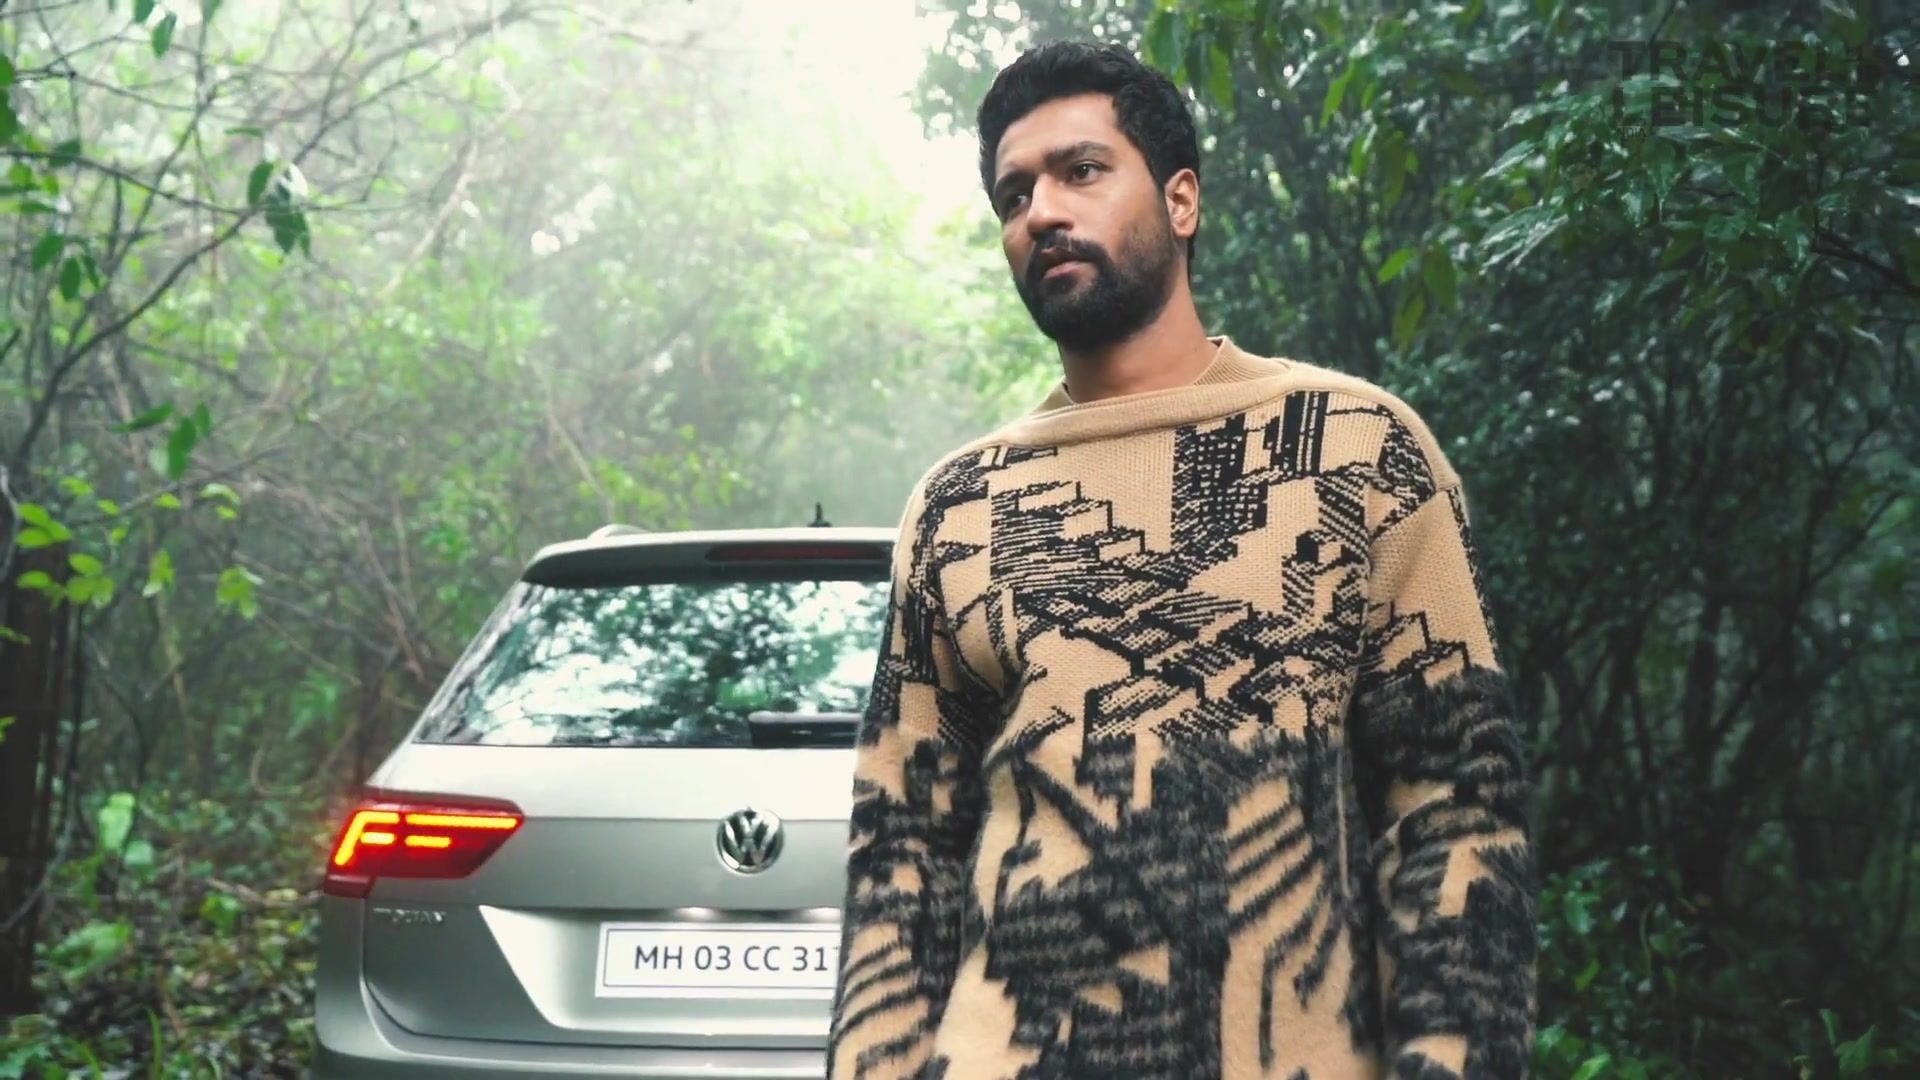 Volkswagen Journey Cover Integration: How AUGMENT and Vicky Kaushal helped connect the Tiguan with a younger and adventurous audience